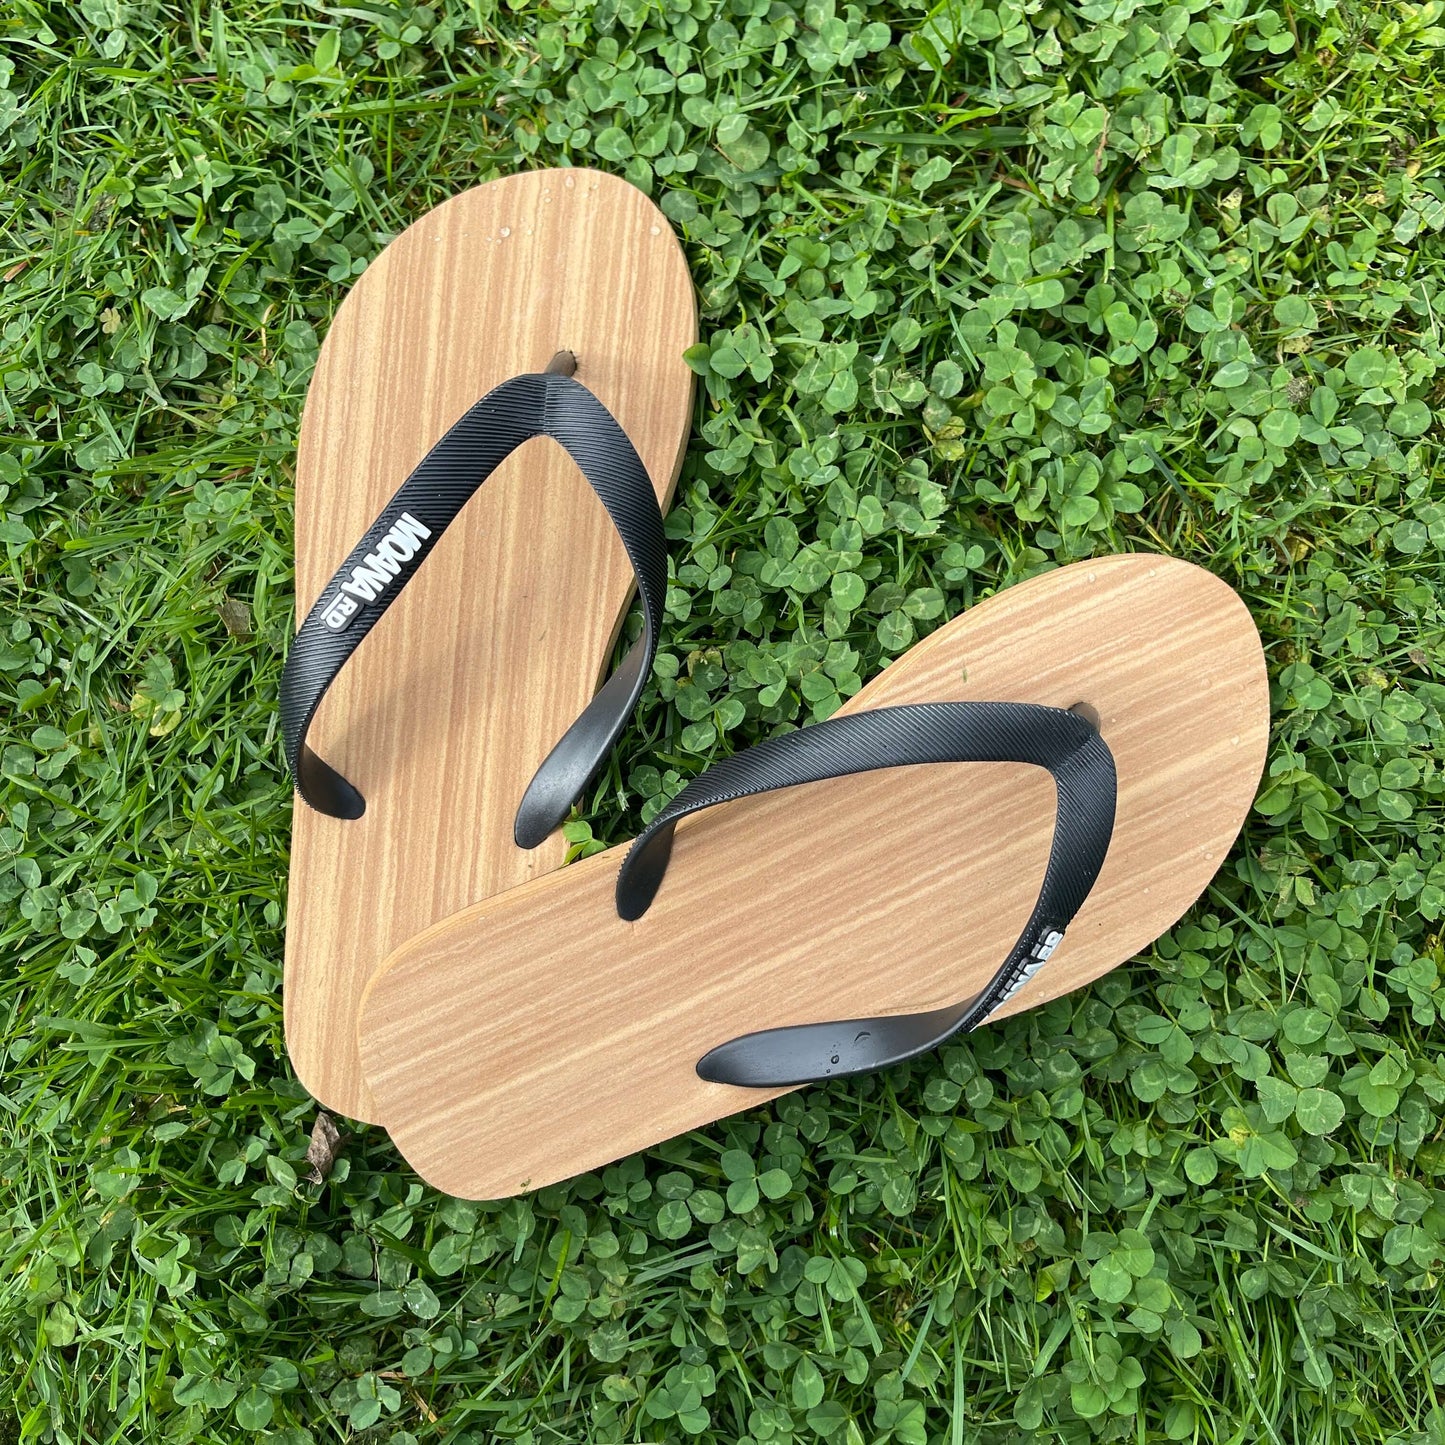 Unisex Jandals with a wood grain look and black straps sitting on grass.